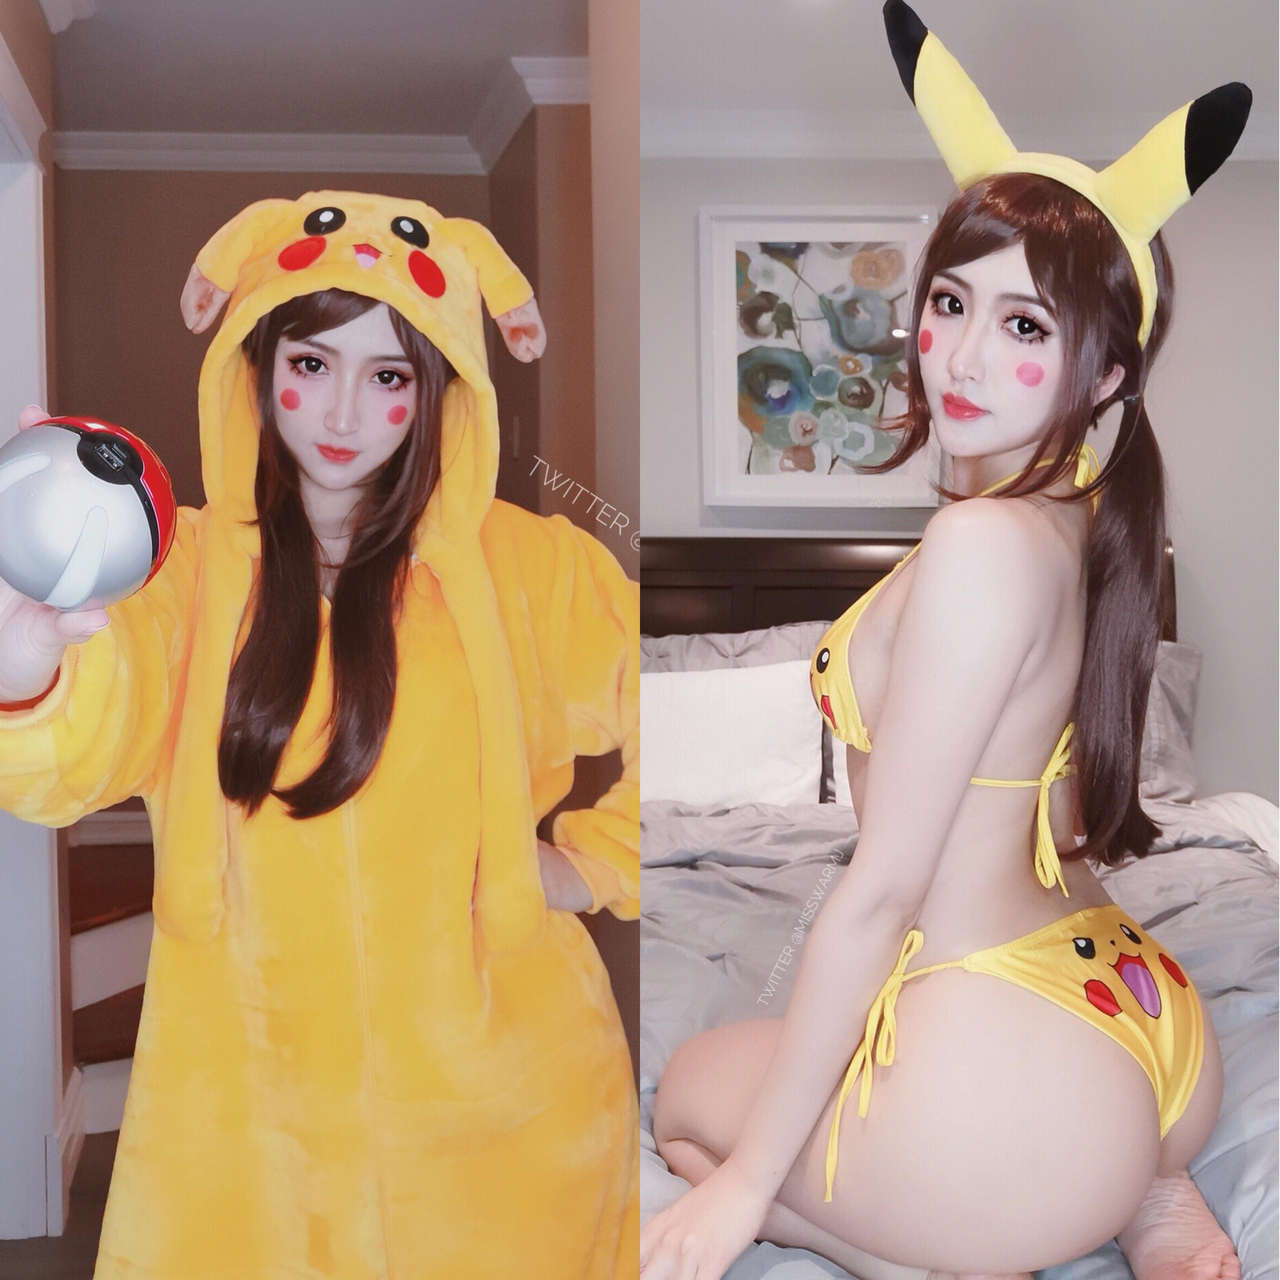 Self On Or Off Upvote For Both Pikachu Cosplay By Misswarm